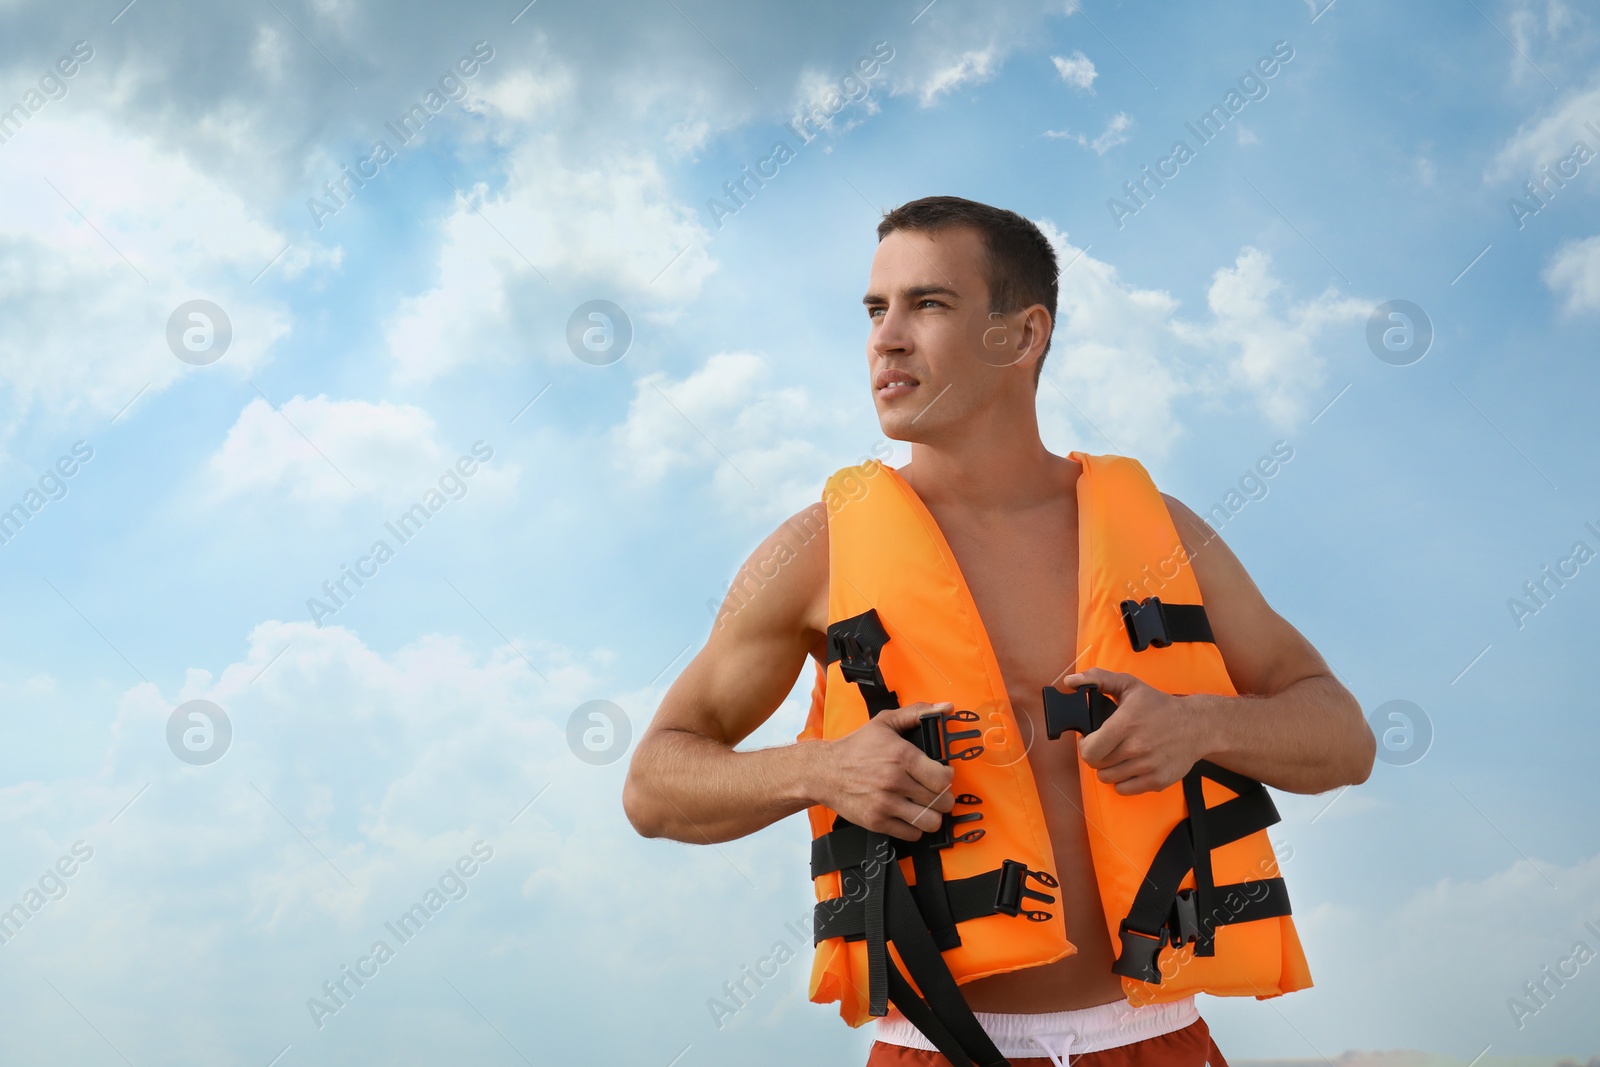 Photo of Handsome lifeguard putting on life vest against sky